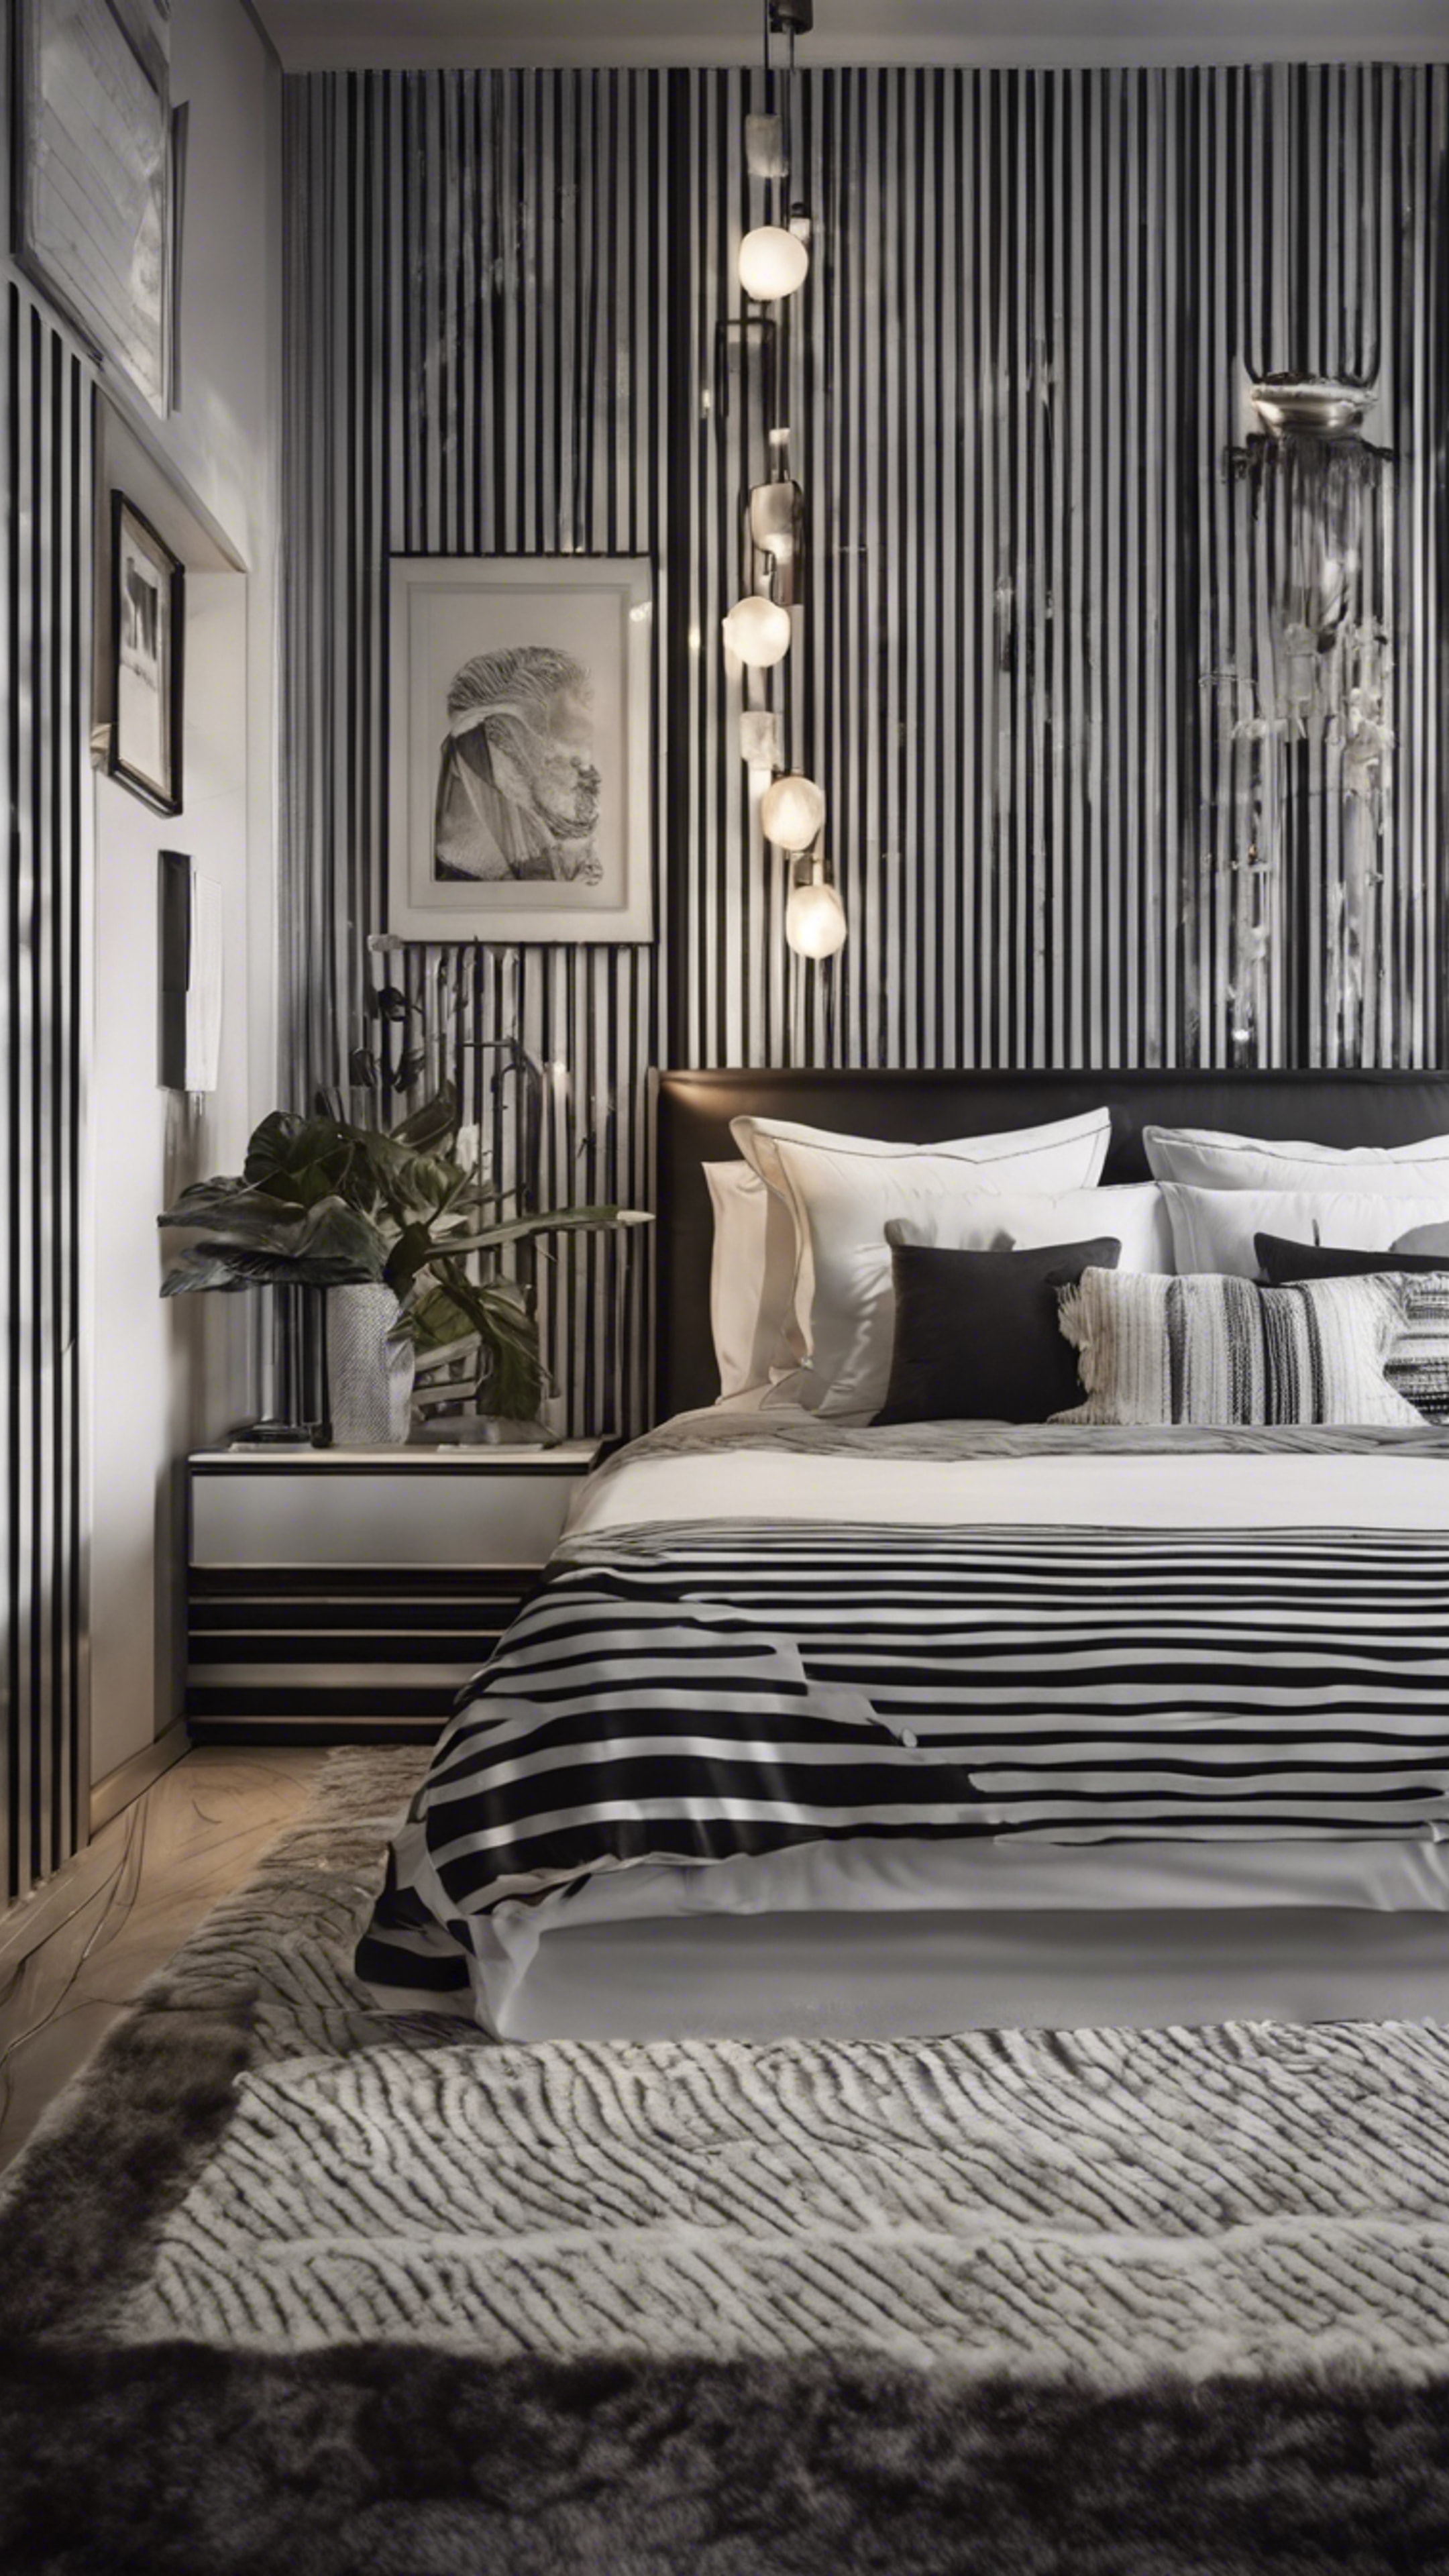 A modern bedroom with black and white striped wallpaper. Wallpaper[2a6e9262711447fbae34]